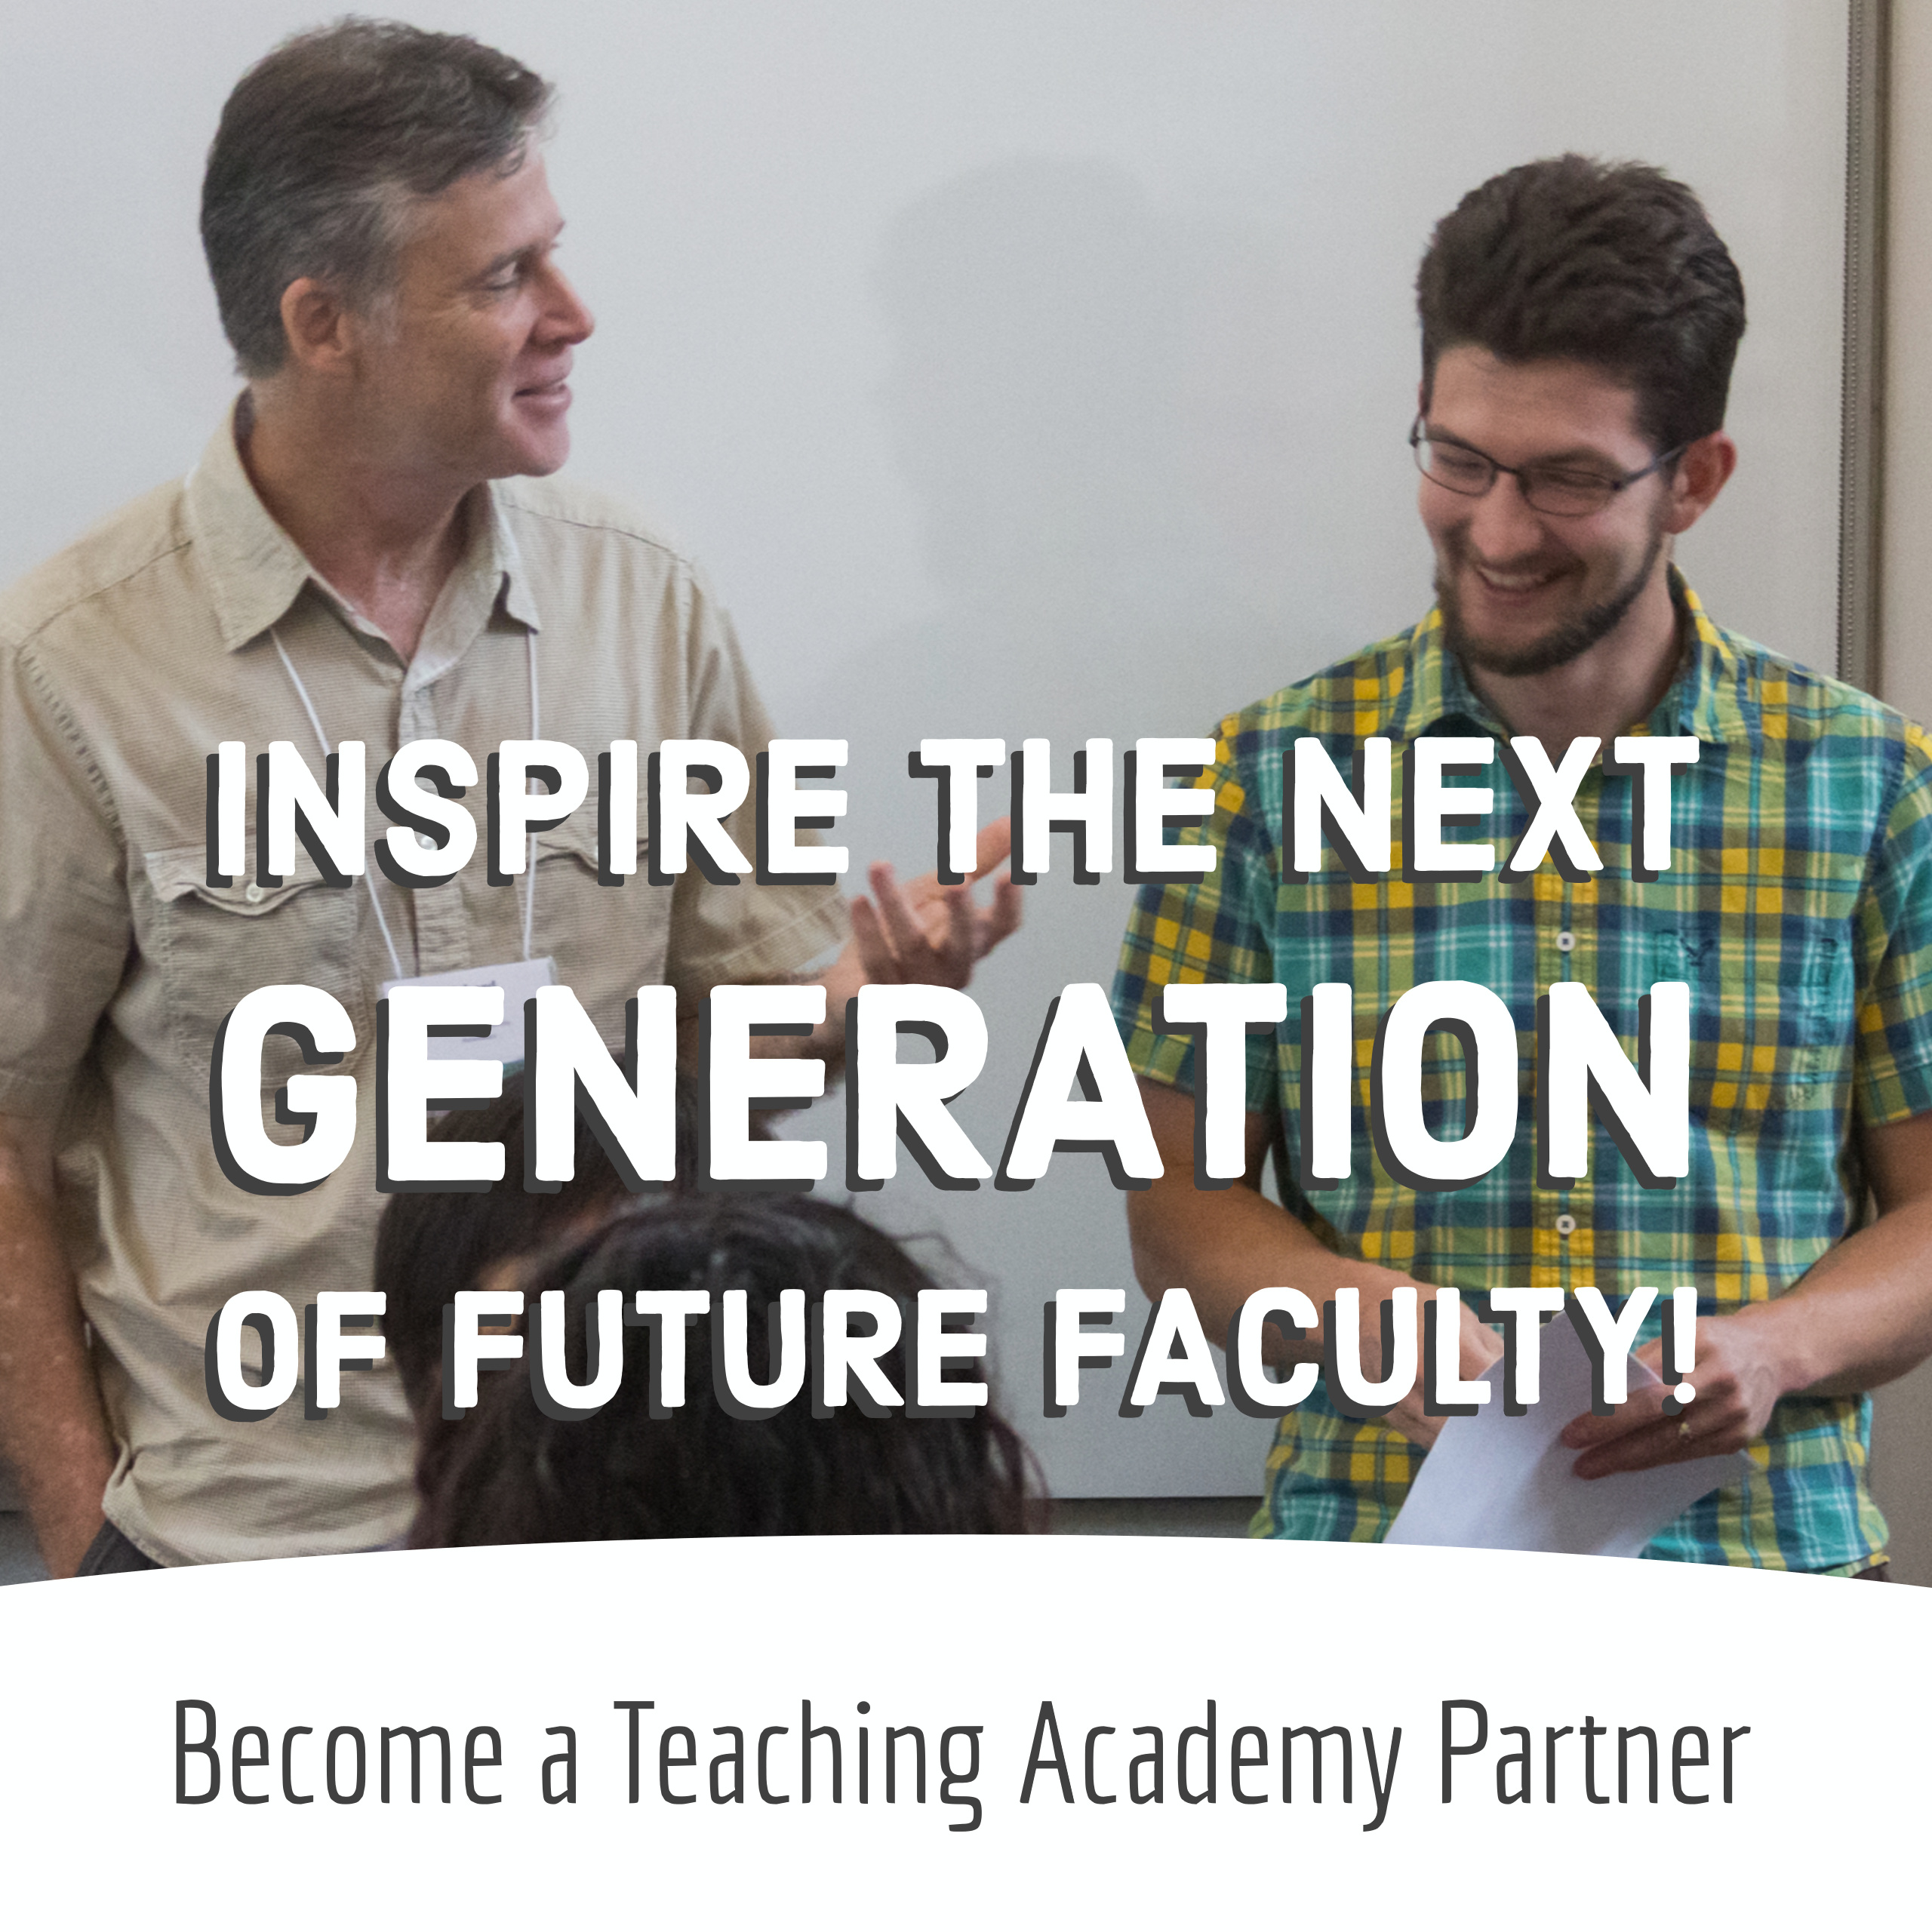 Become a Teaching Academy Partner image